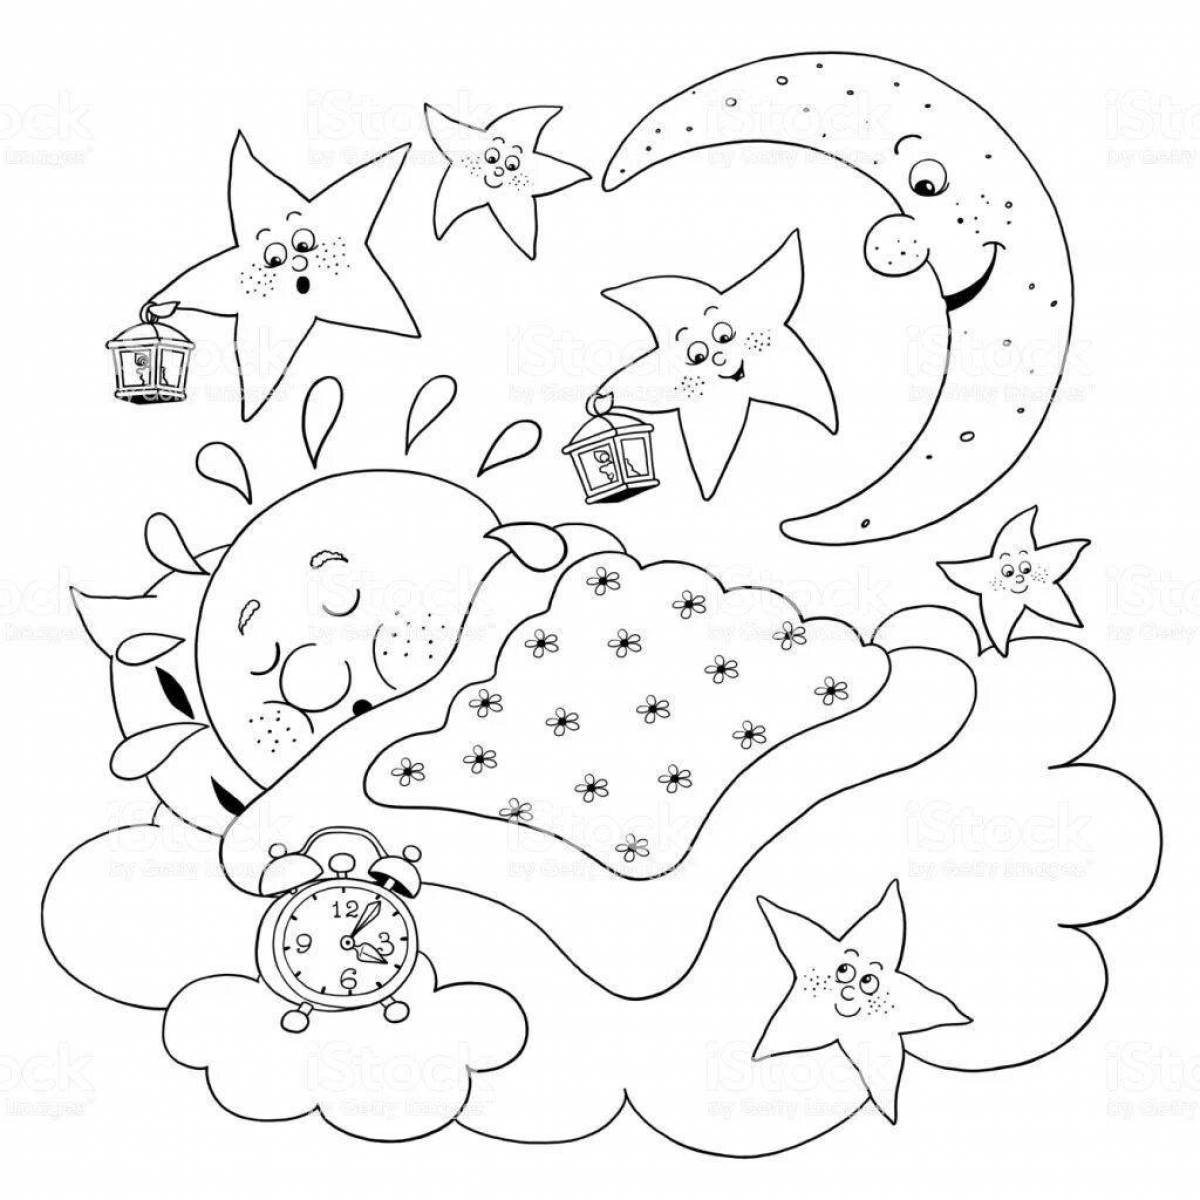 Fantastic starry sky coloring book for kids